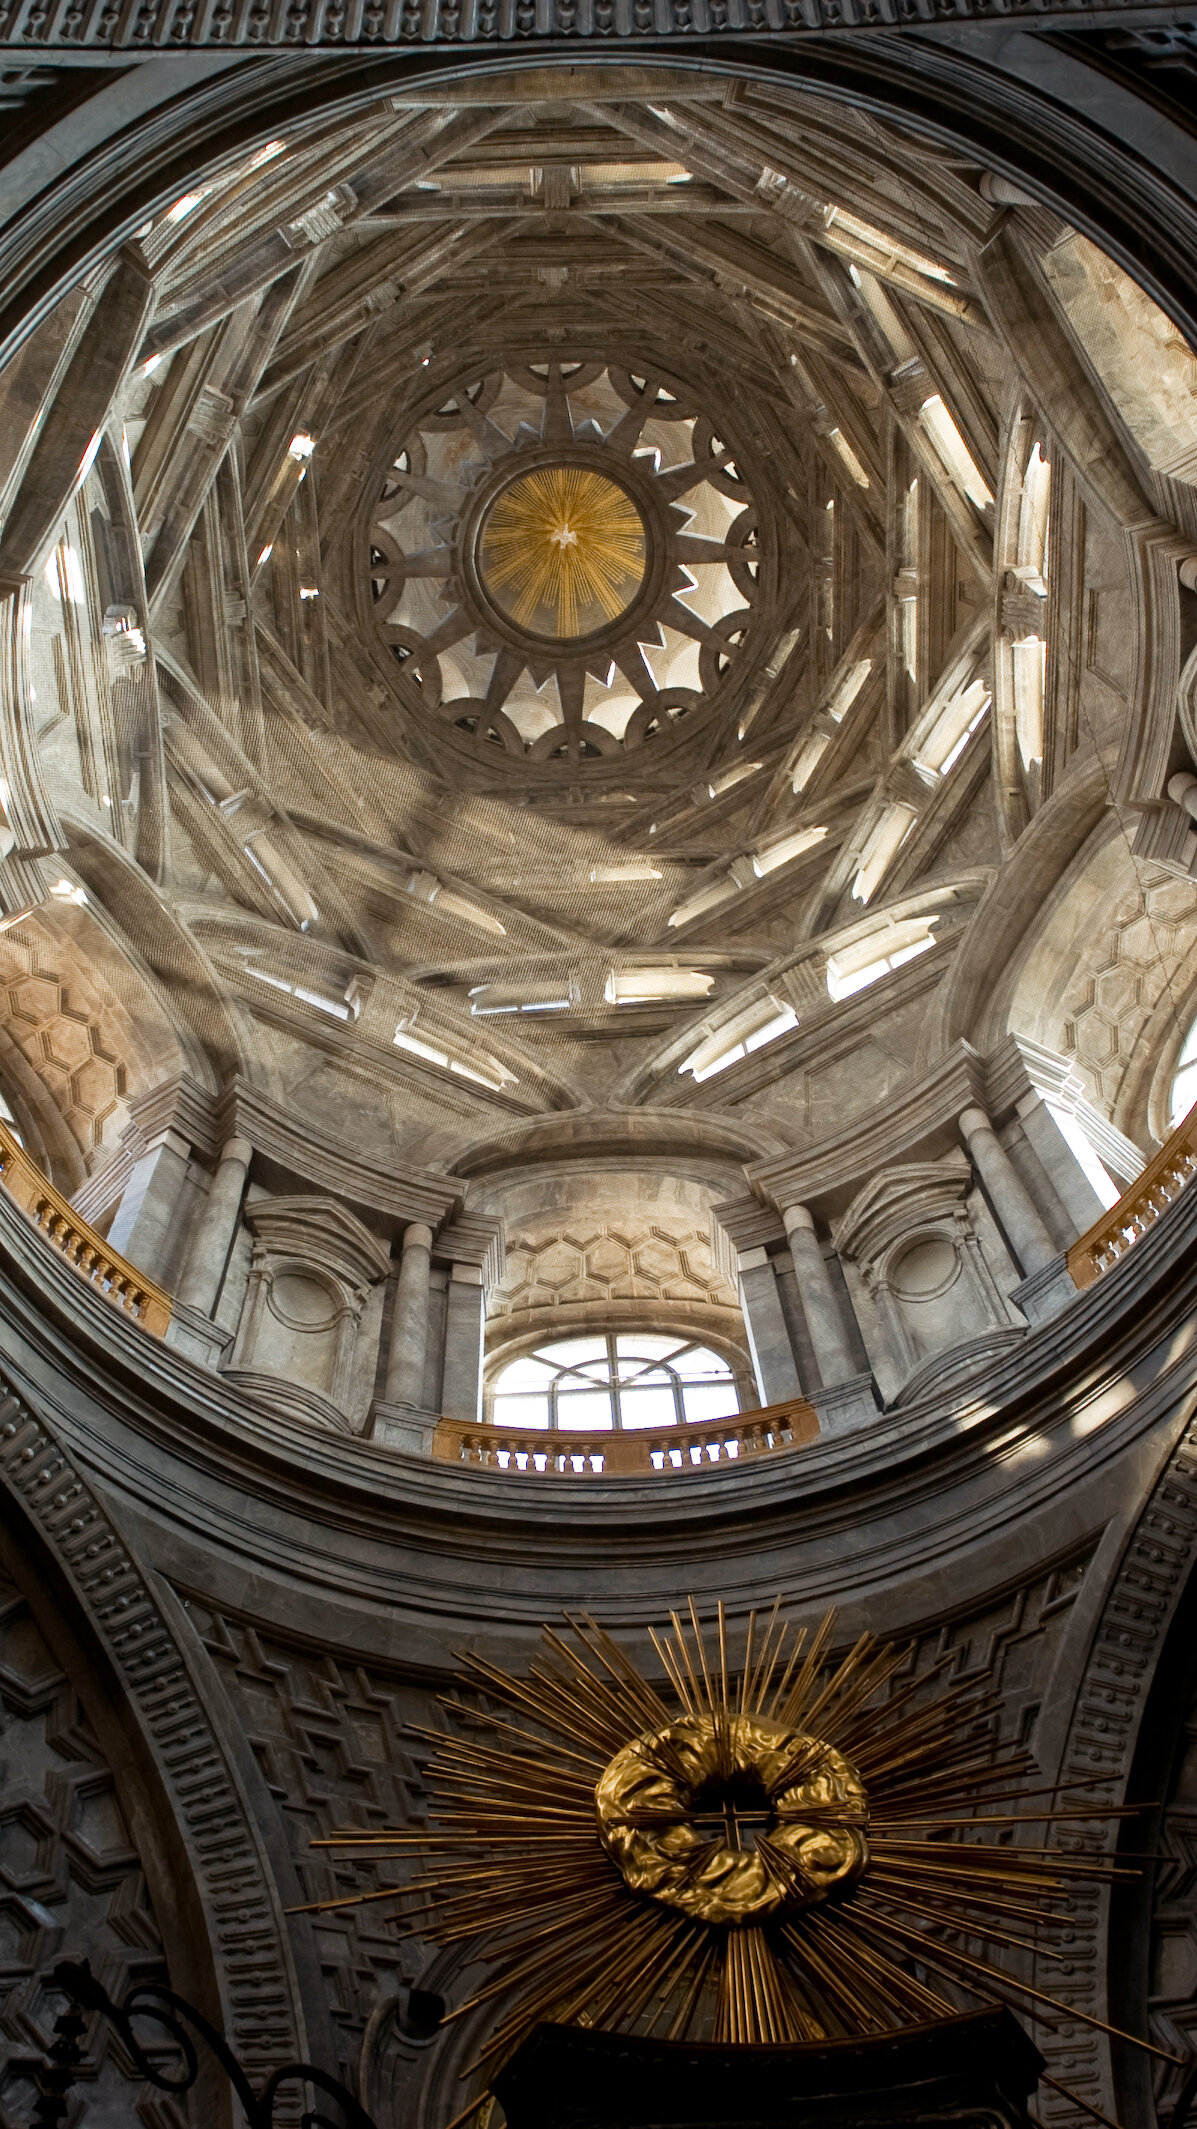 A view looking up at the interior of an ornately decorated dome in a grand building. Sunlight is streaming through windows at the top of the dome. 